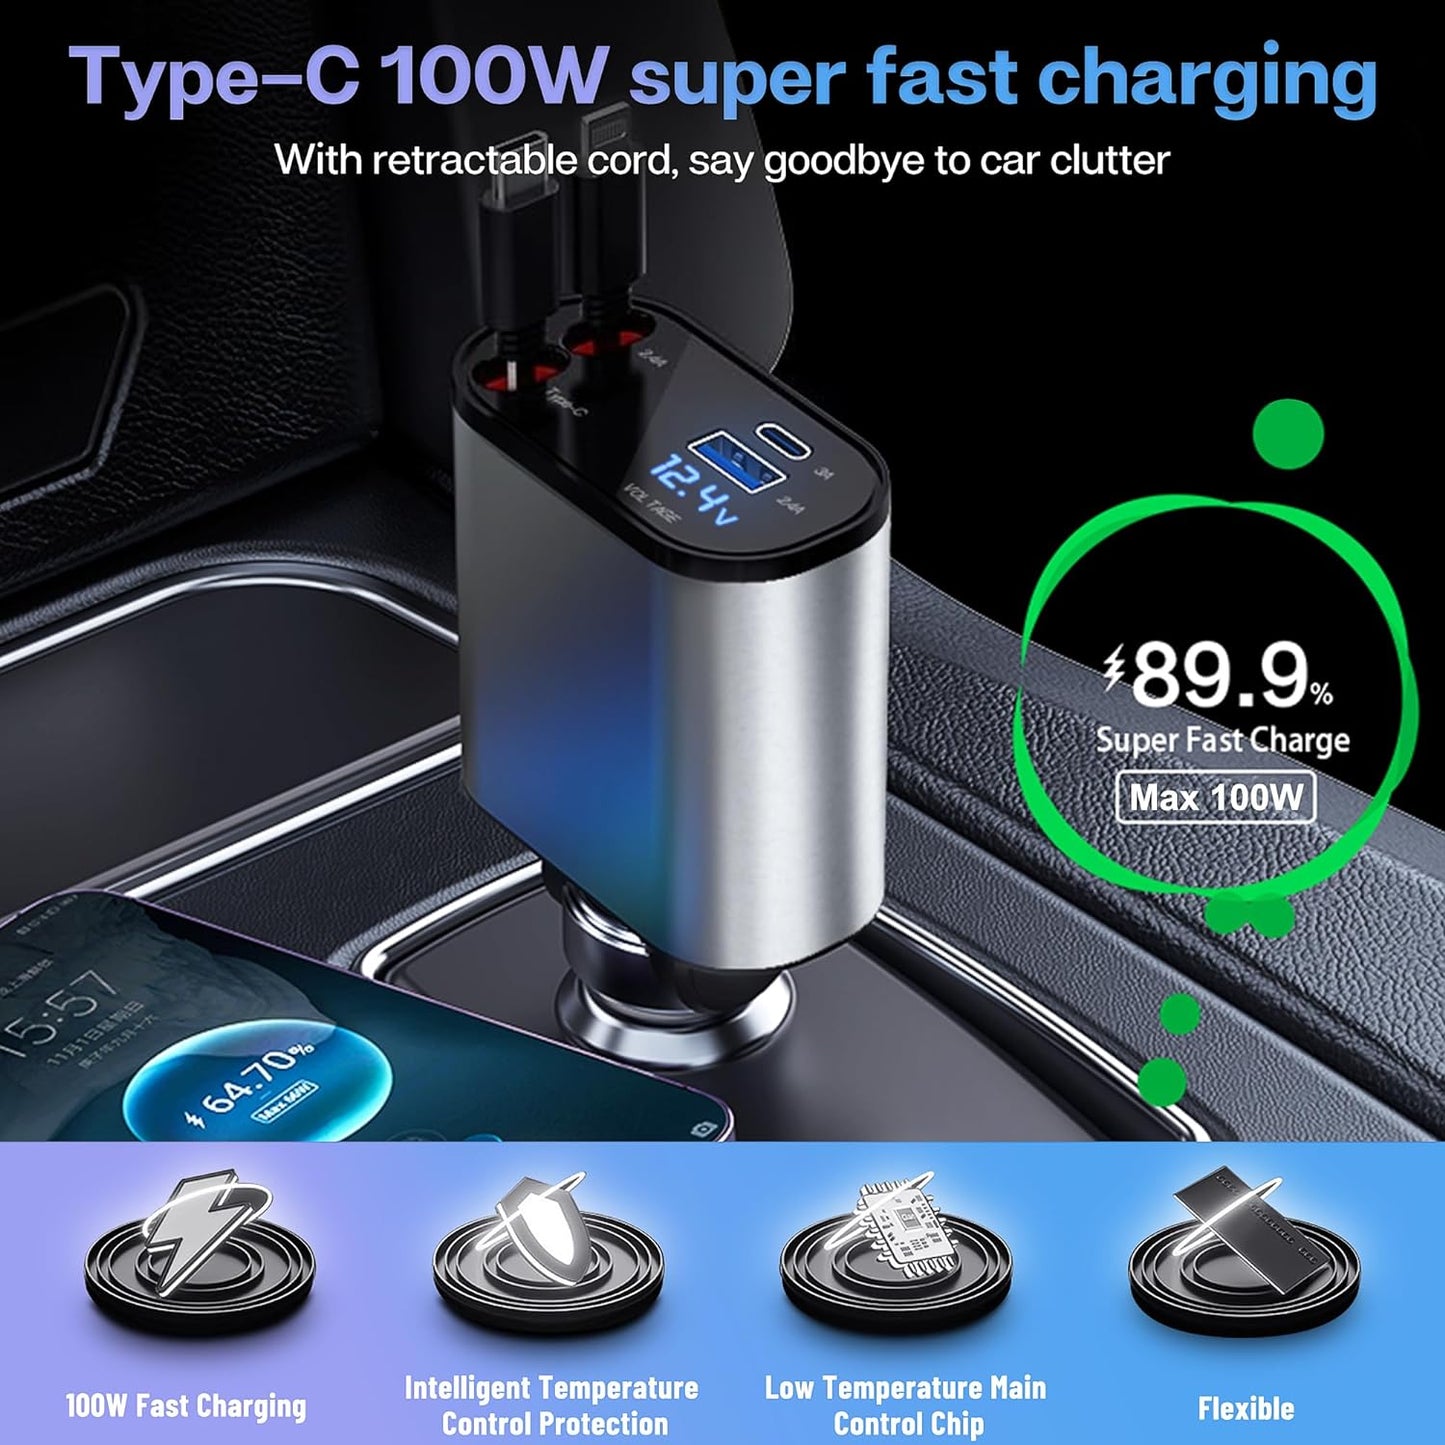 Retractable Car Charger, 120W 4 in 1 Superfast Car Charger, Type C & USB Charging Ports